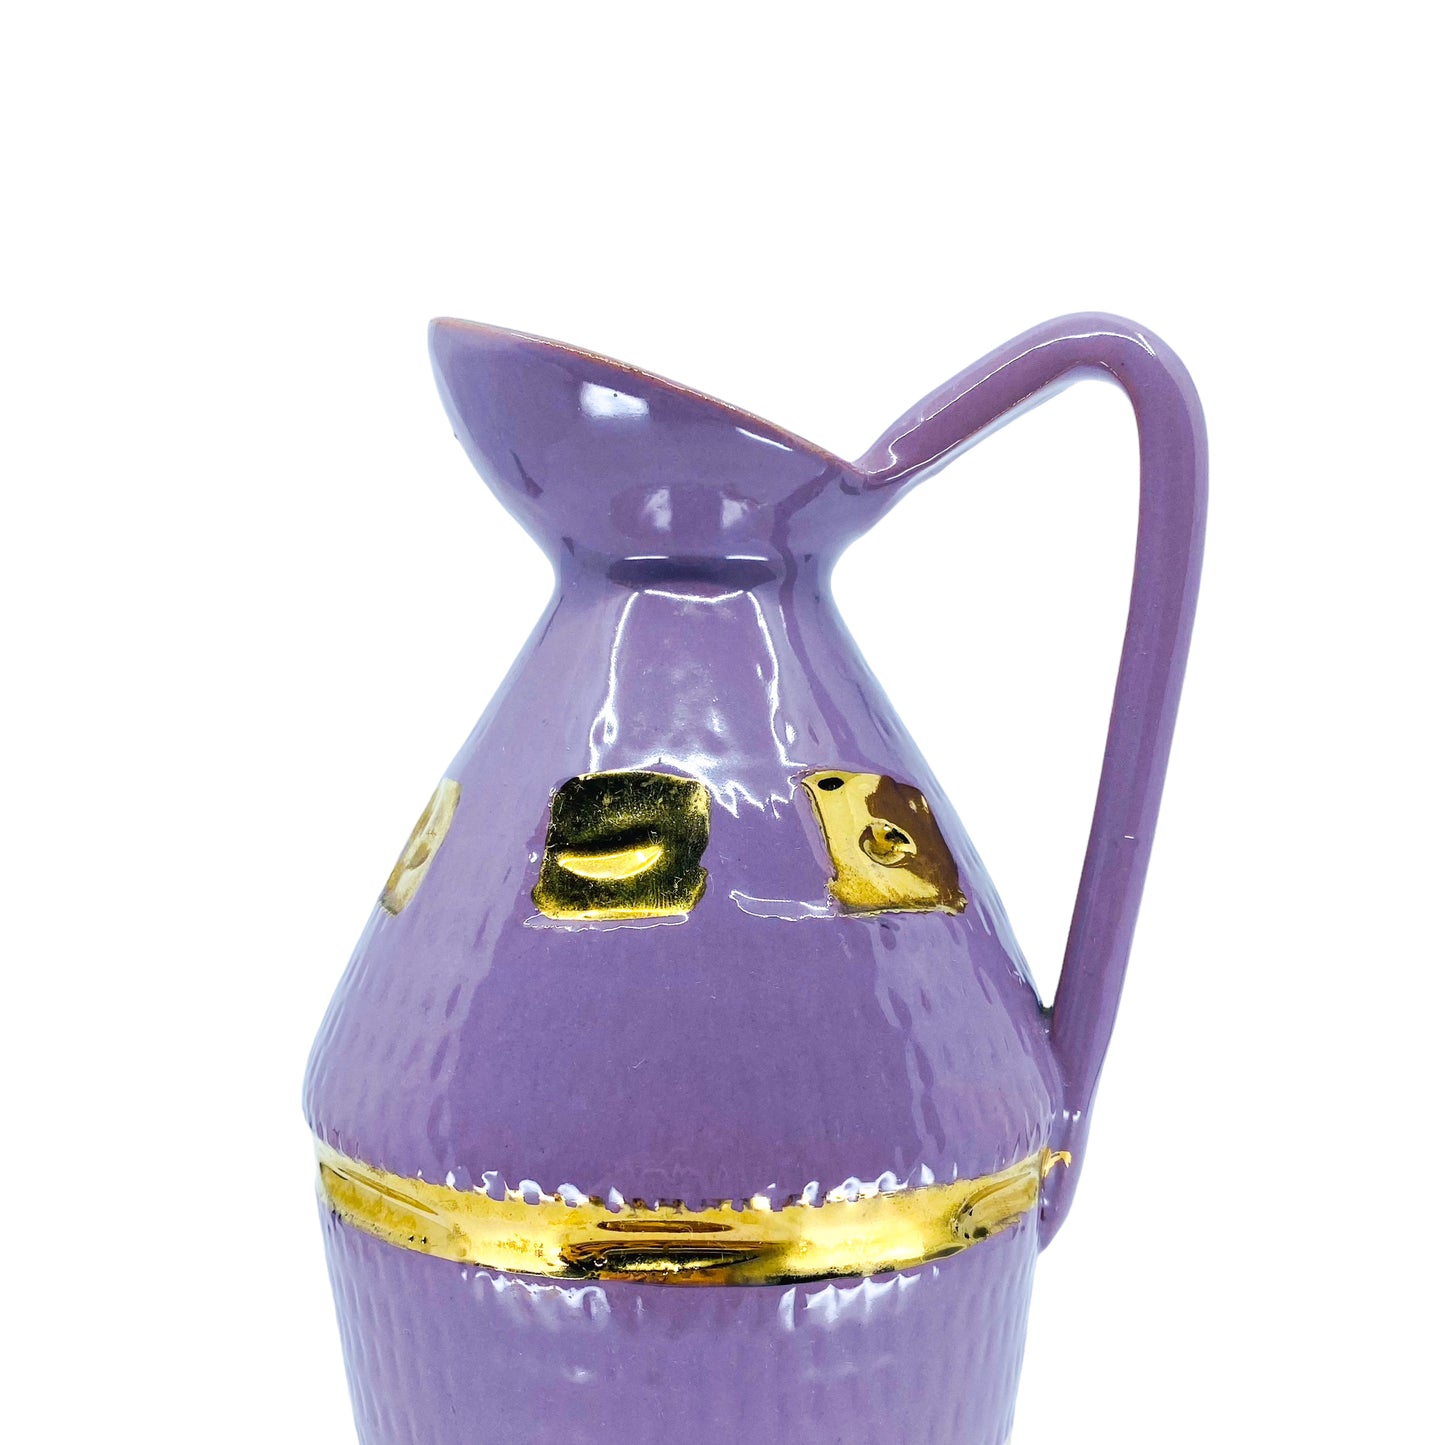 Vintage Made in Italy Lavender & Gold Ceramic Pitcher